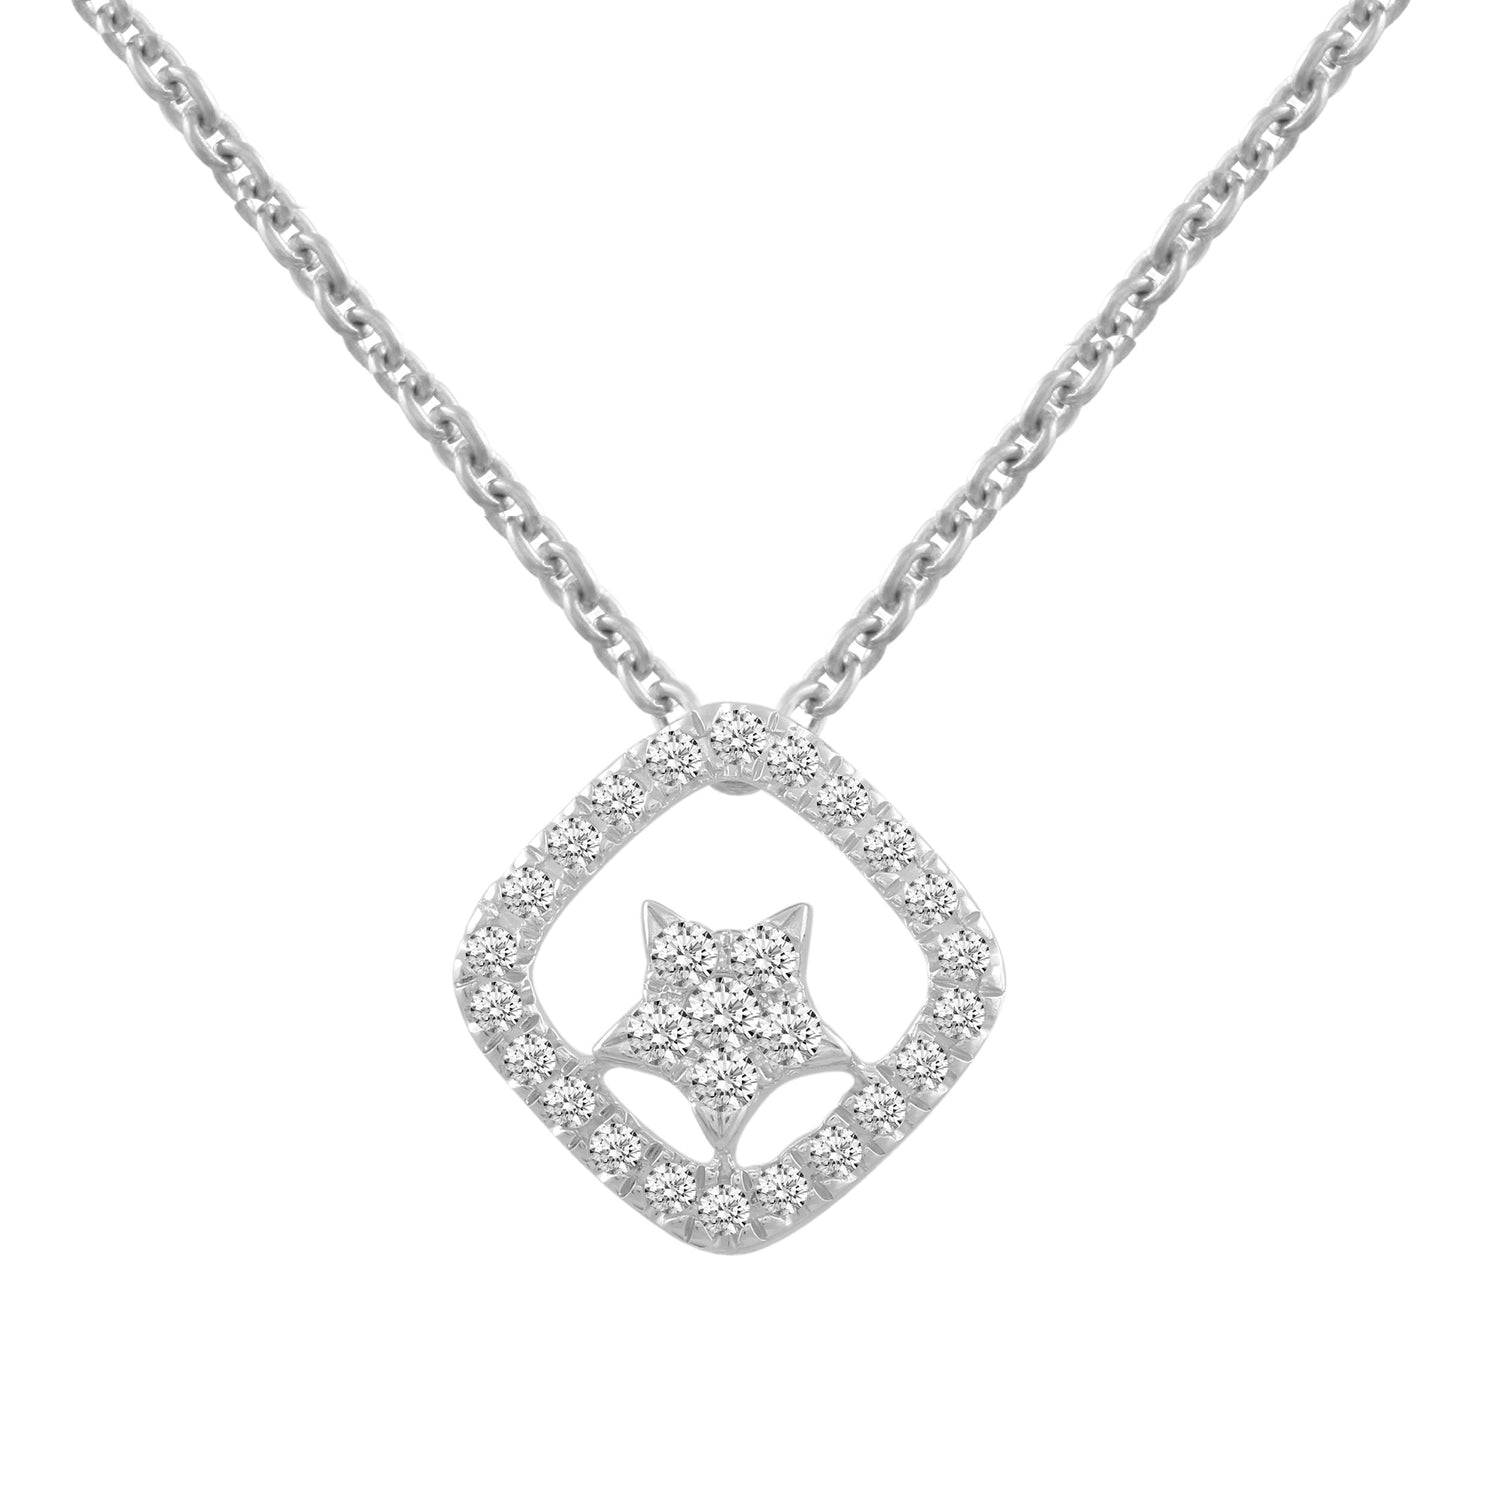 1/4 CT TW Diamond Floating Star Square Pendant Necklace in 925 Sterling Silver